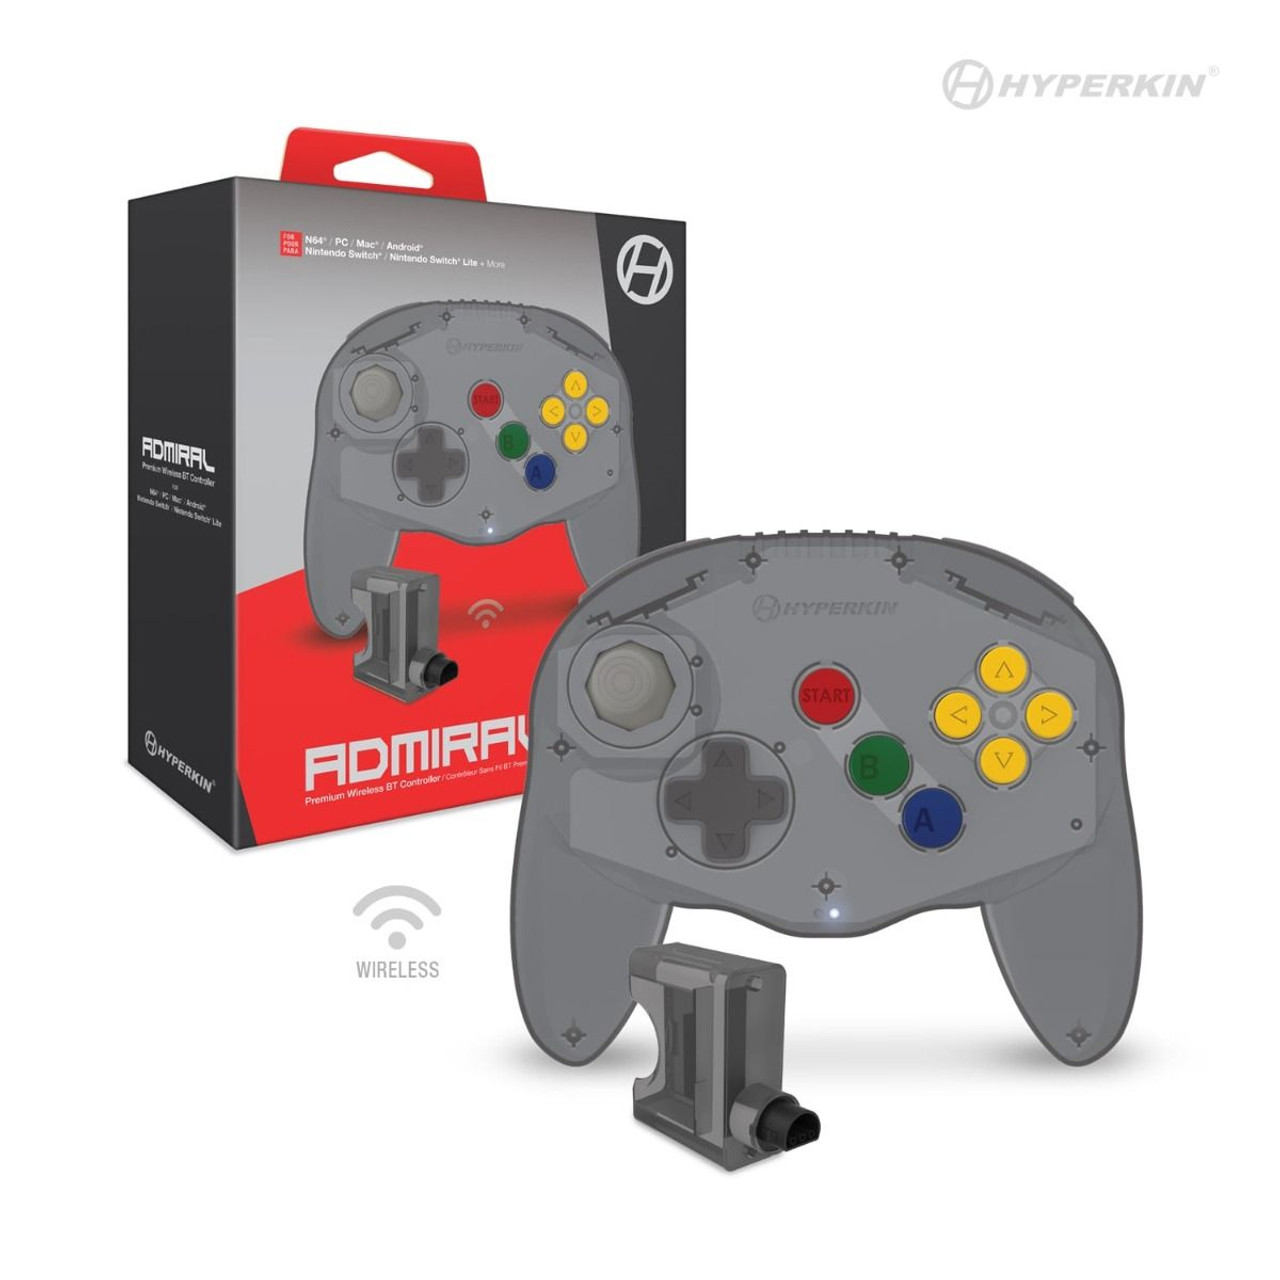 Admiral Premium Bluetooth Controller For Nintendo 64 / Nintendo Switch / PC/ Mac / Android Hyperkin - Stone Age Gamer